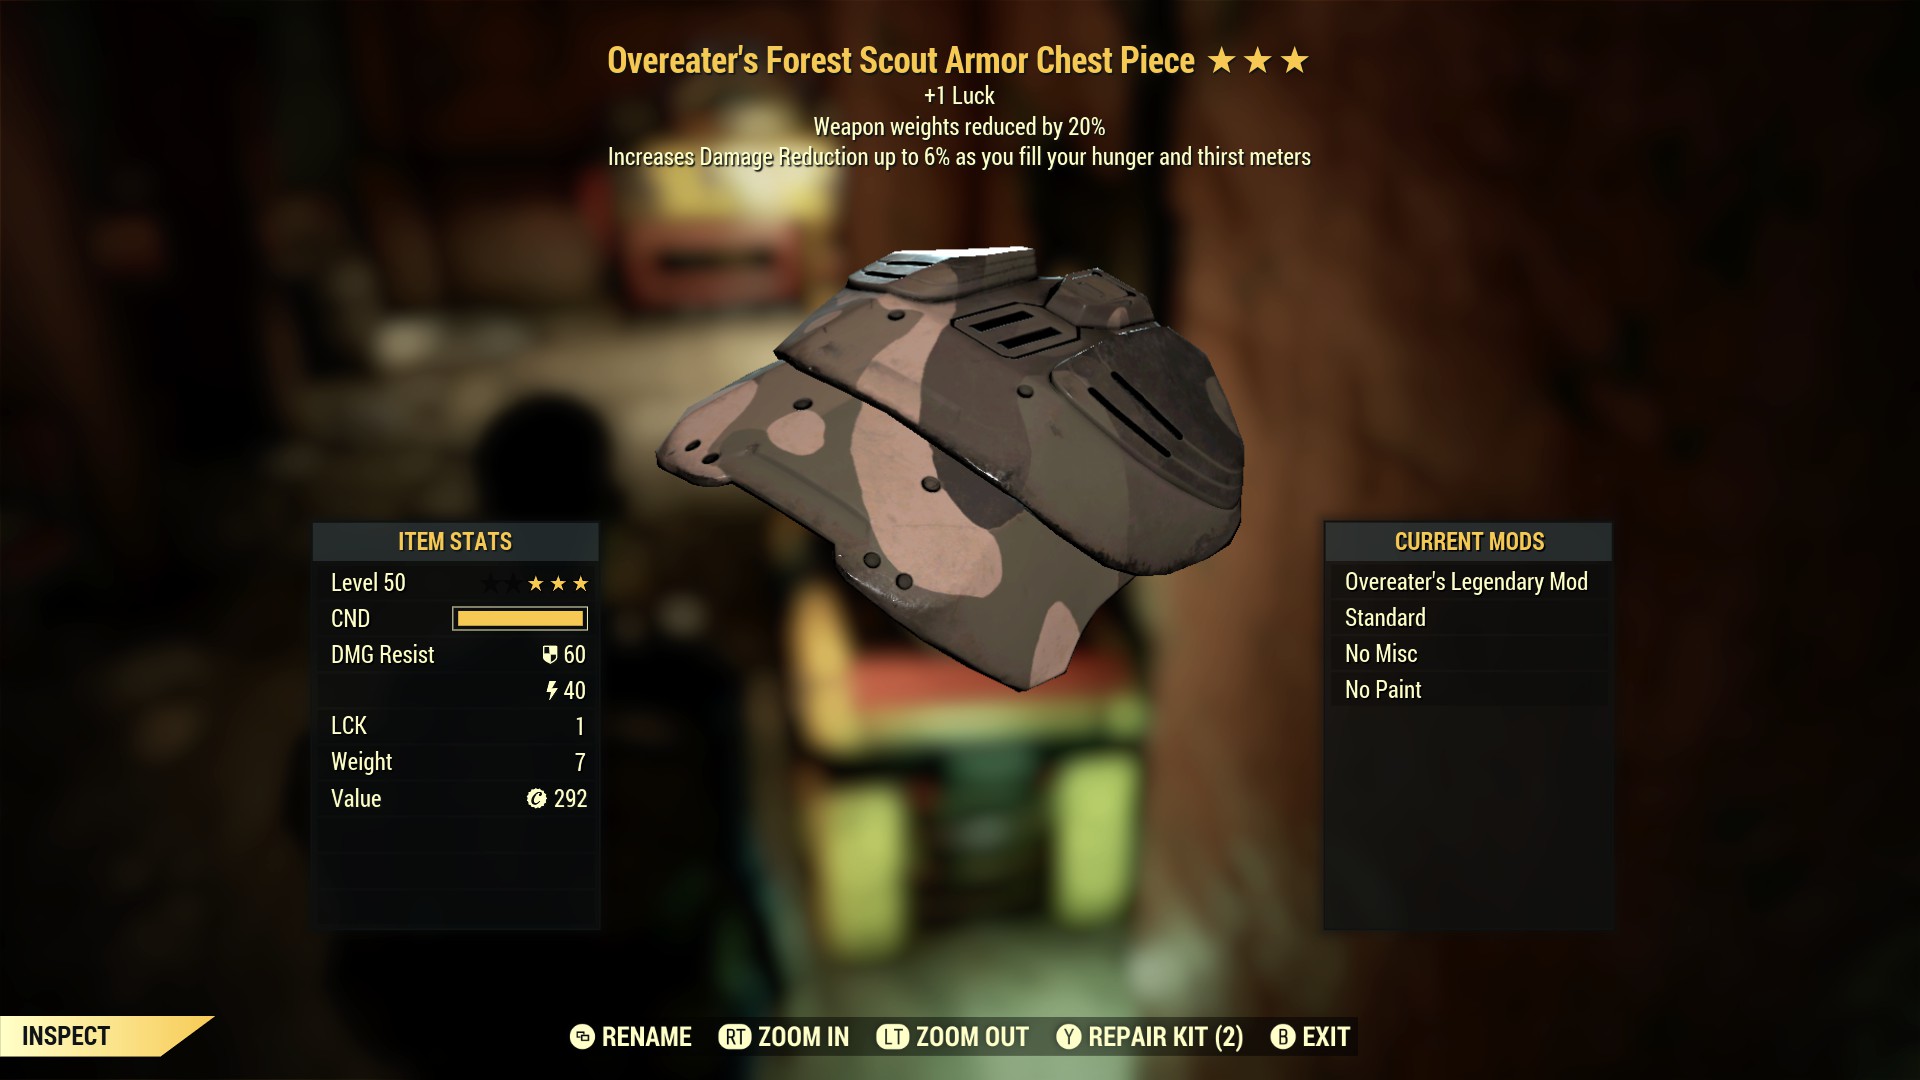 Overeater's Forest Scout Armor Chest Piece